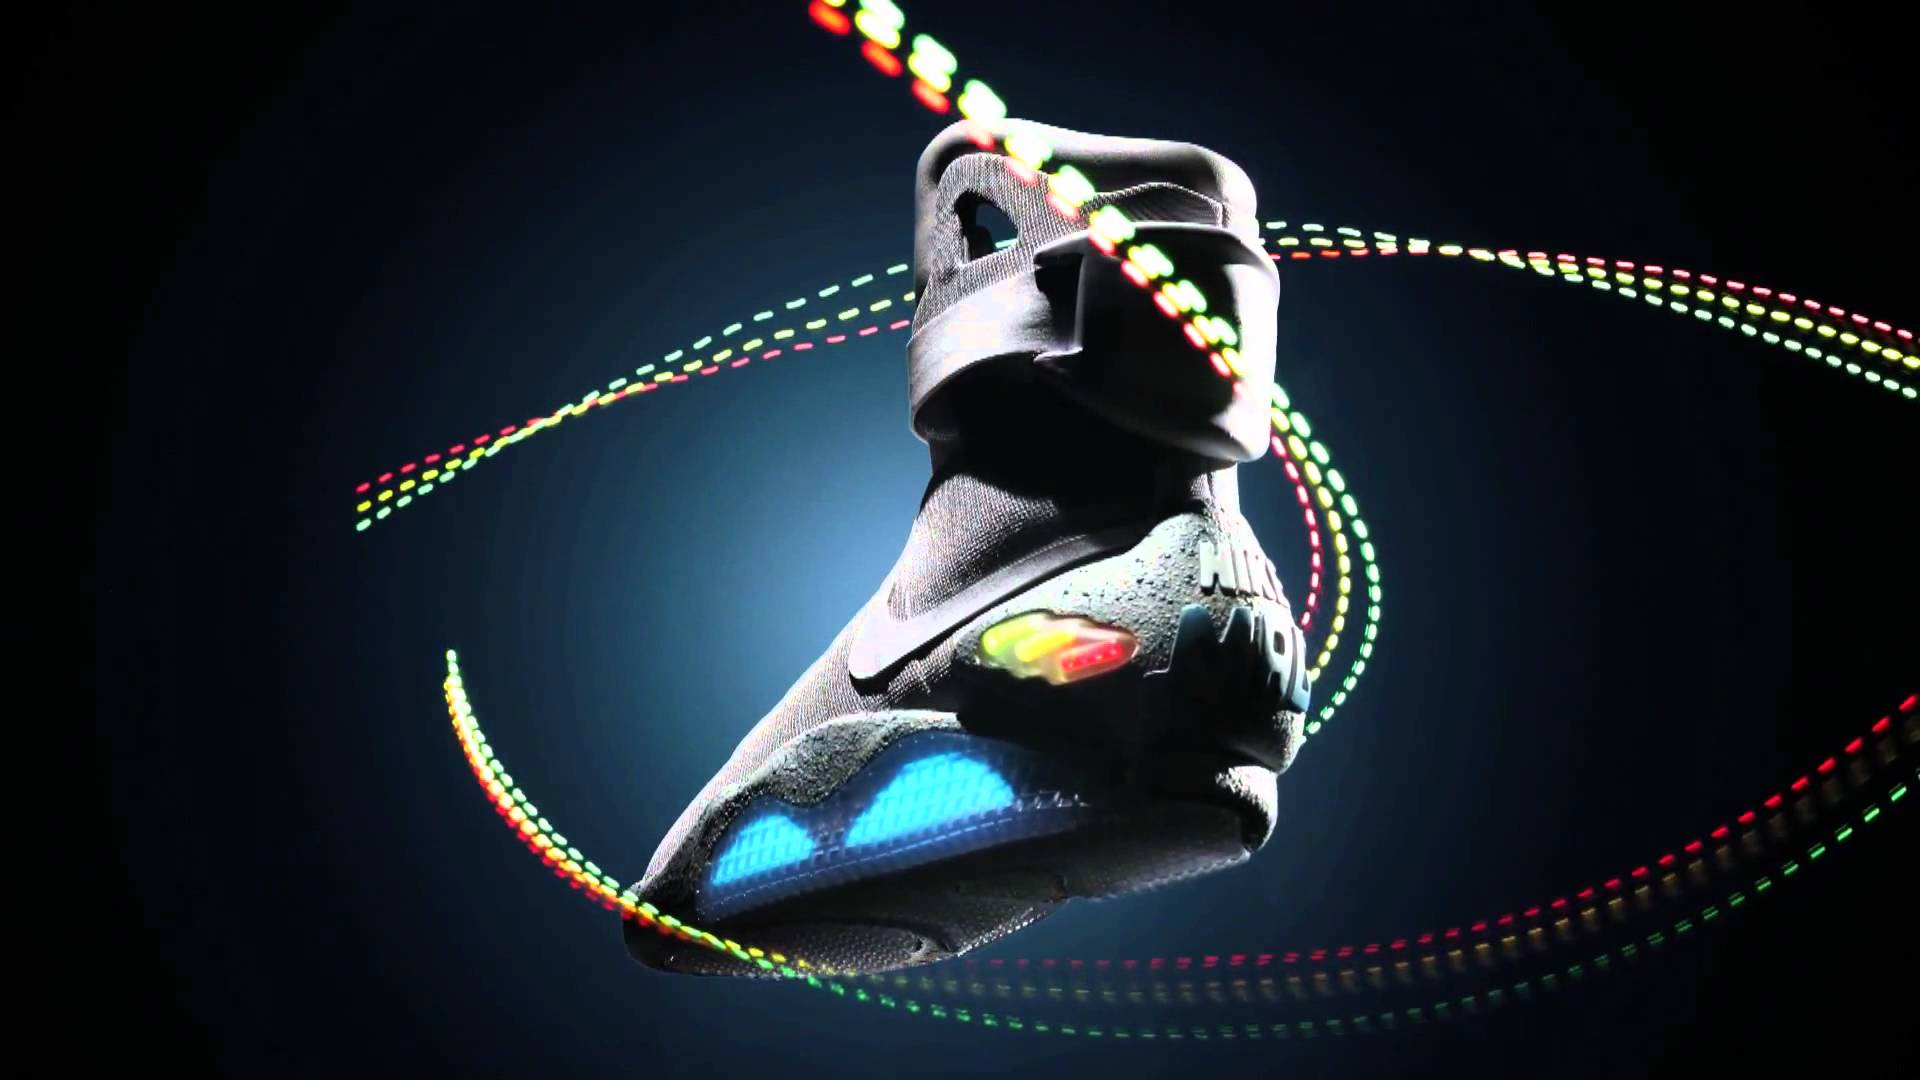 Nike Air MAG 2011 McFlys Back to the Future II Shoes!